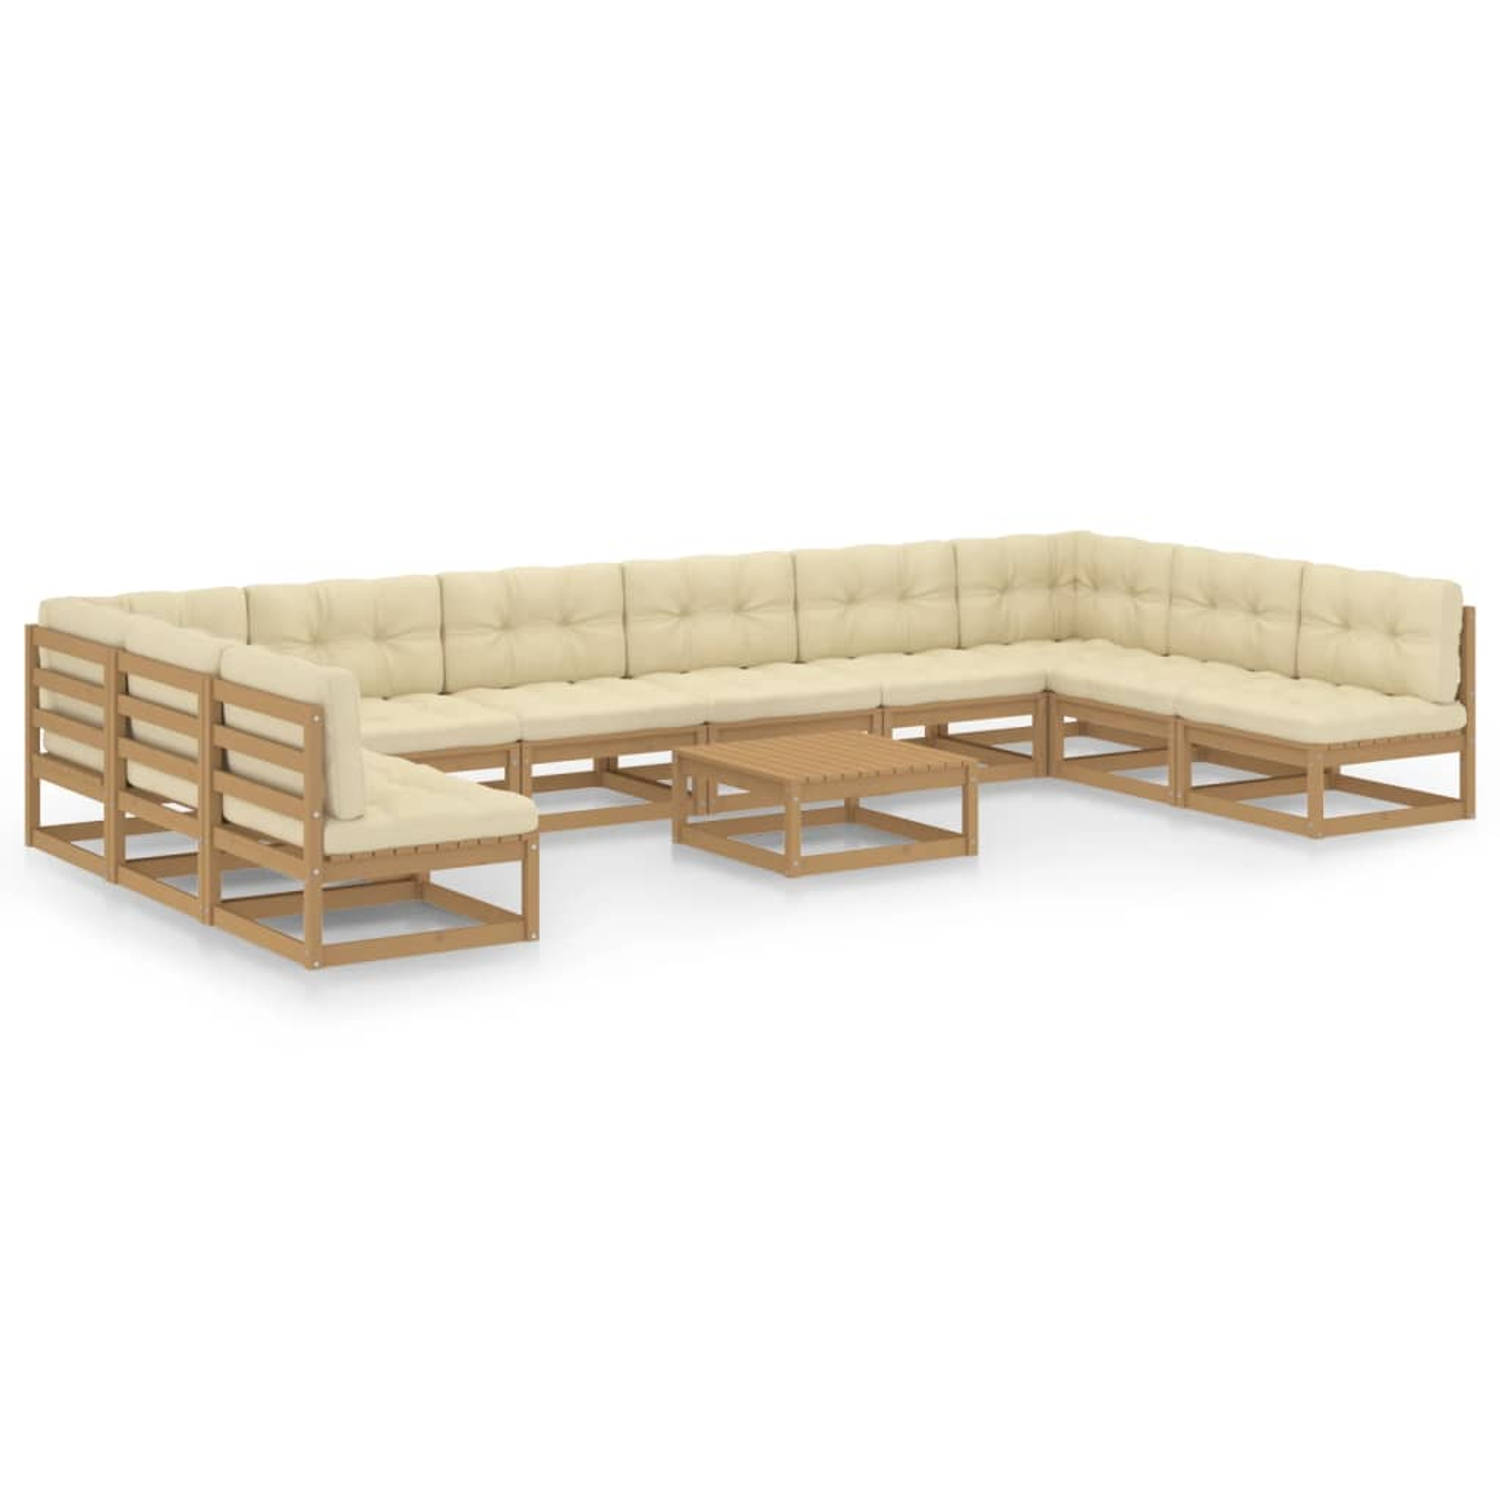 The Living Store Tuinset Grenenhout - Loungeset - 70x70x67 cm - Honingbruin